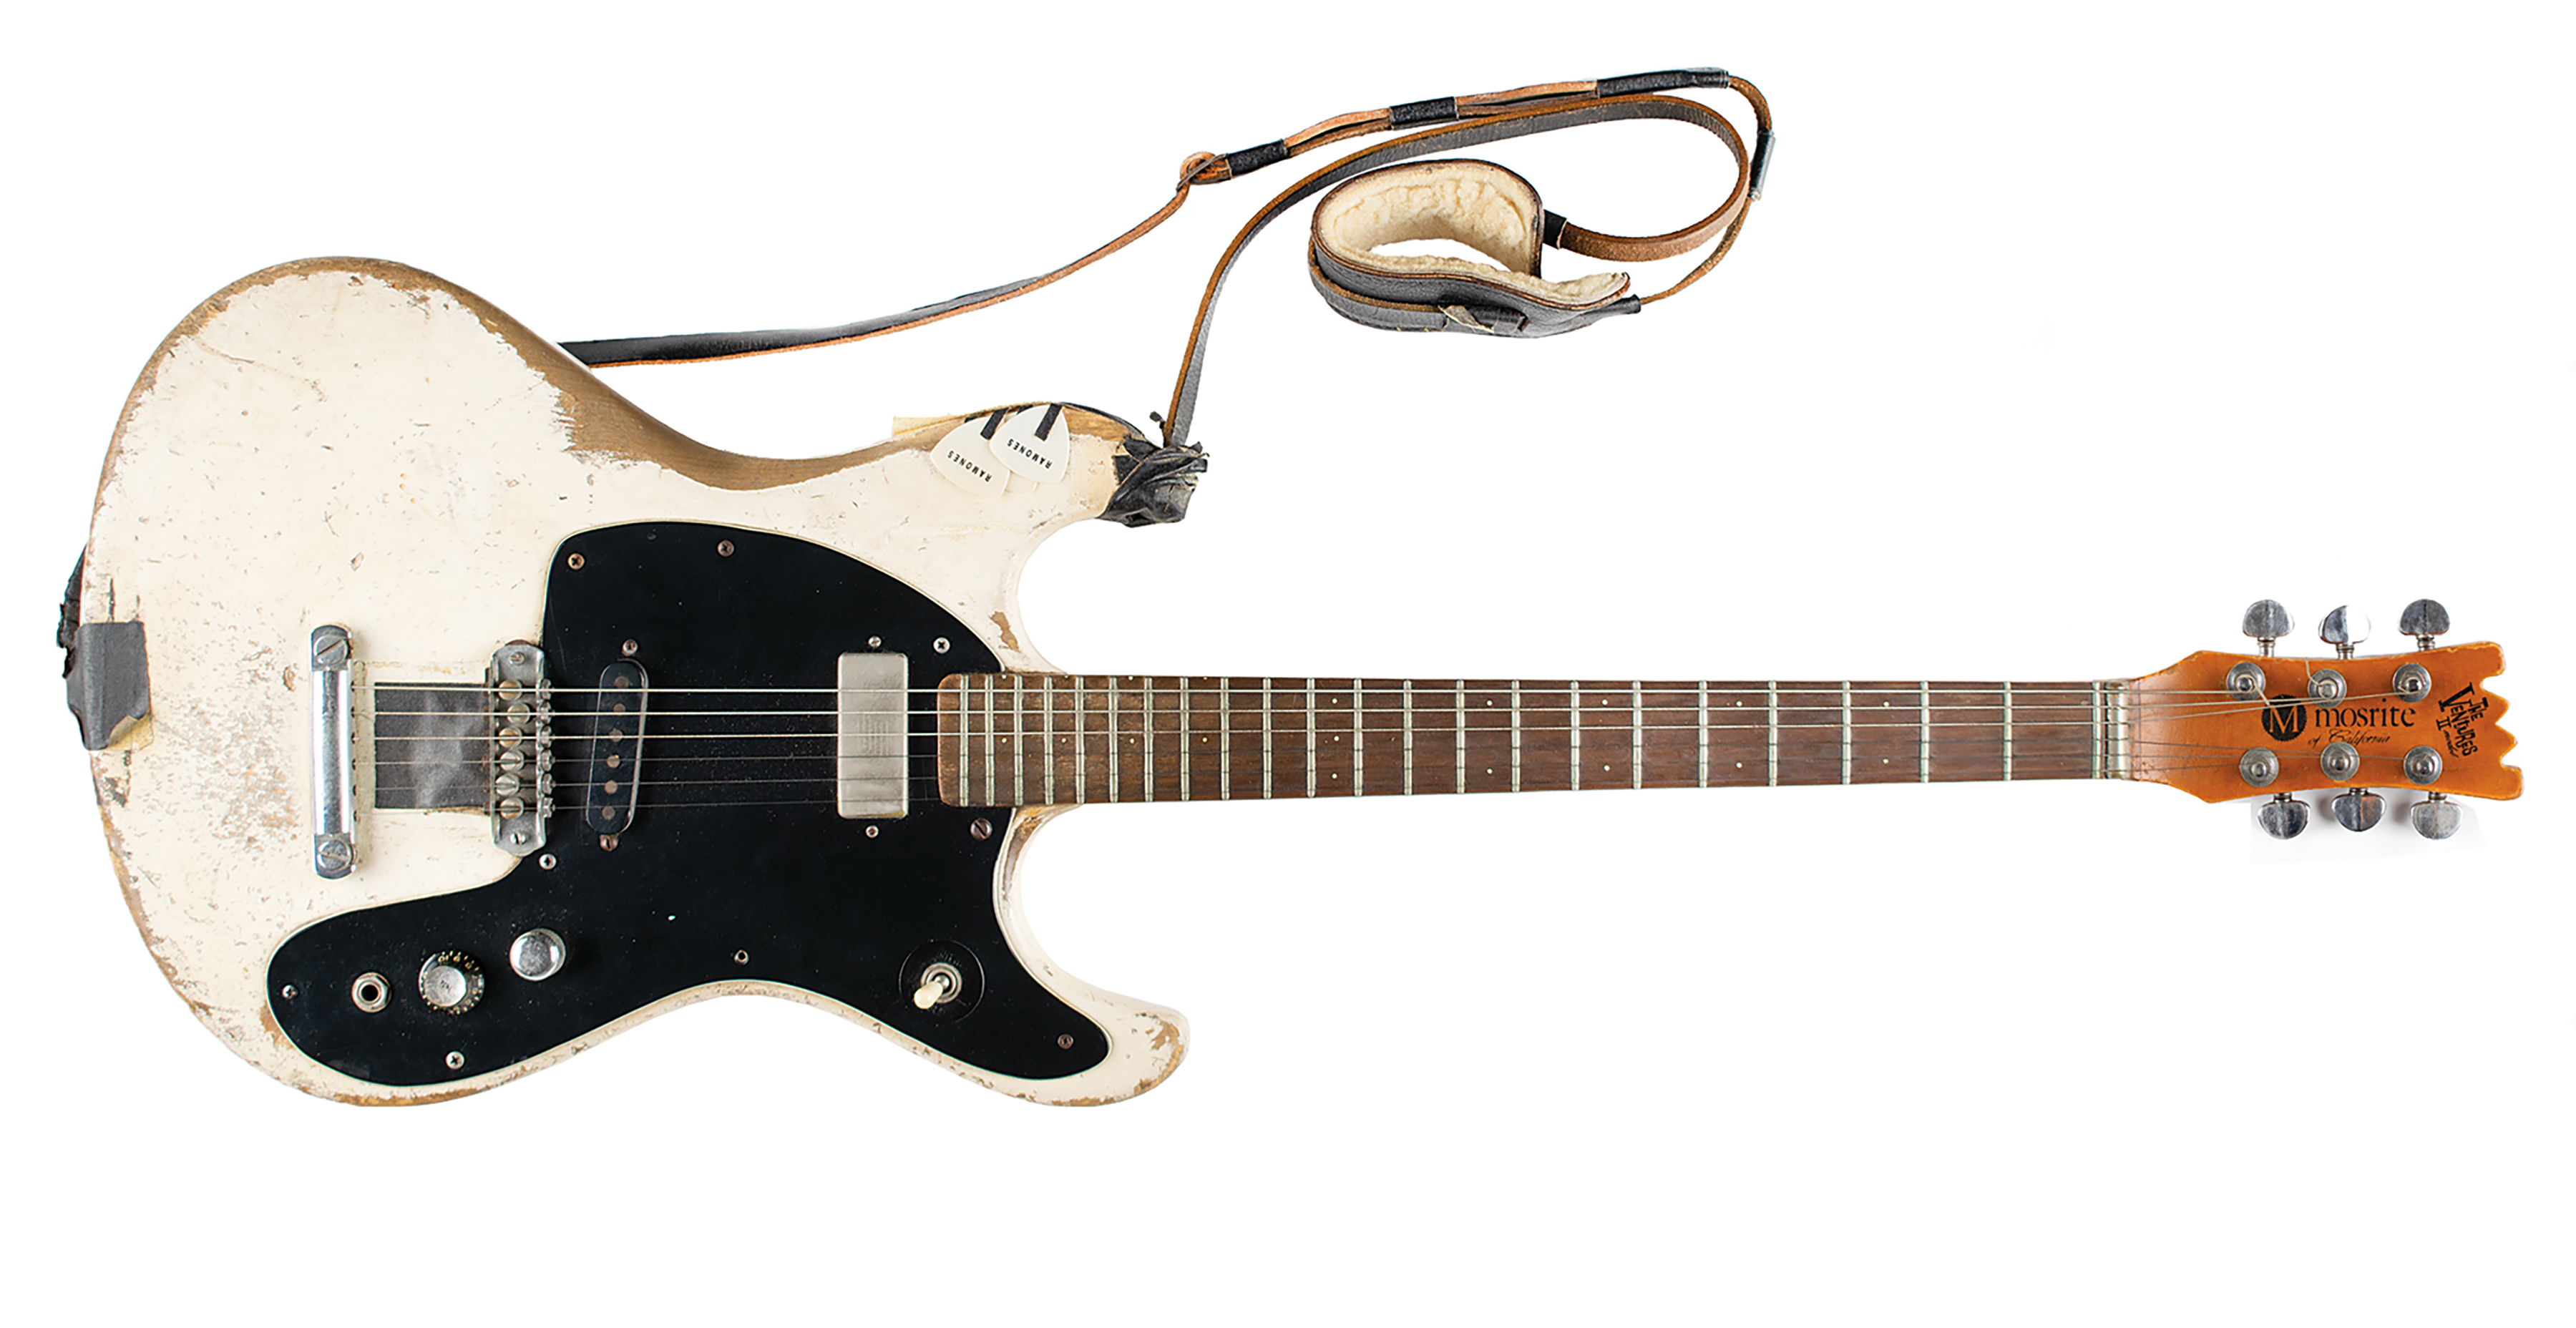 The 1965 Mosrite Ventures II electric guitar played by Johnny Ramone 